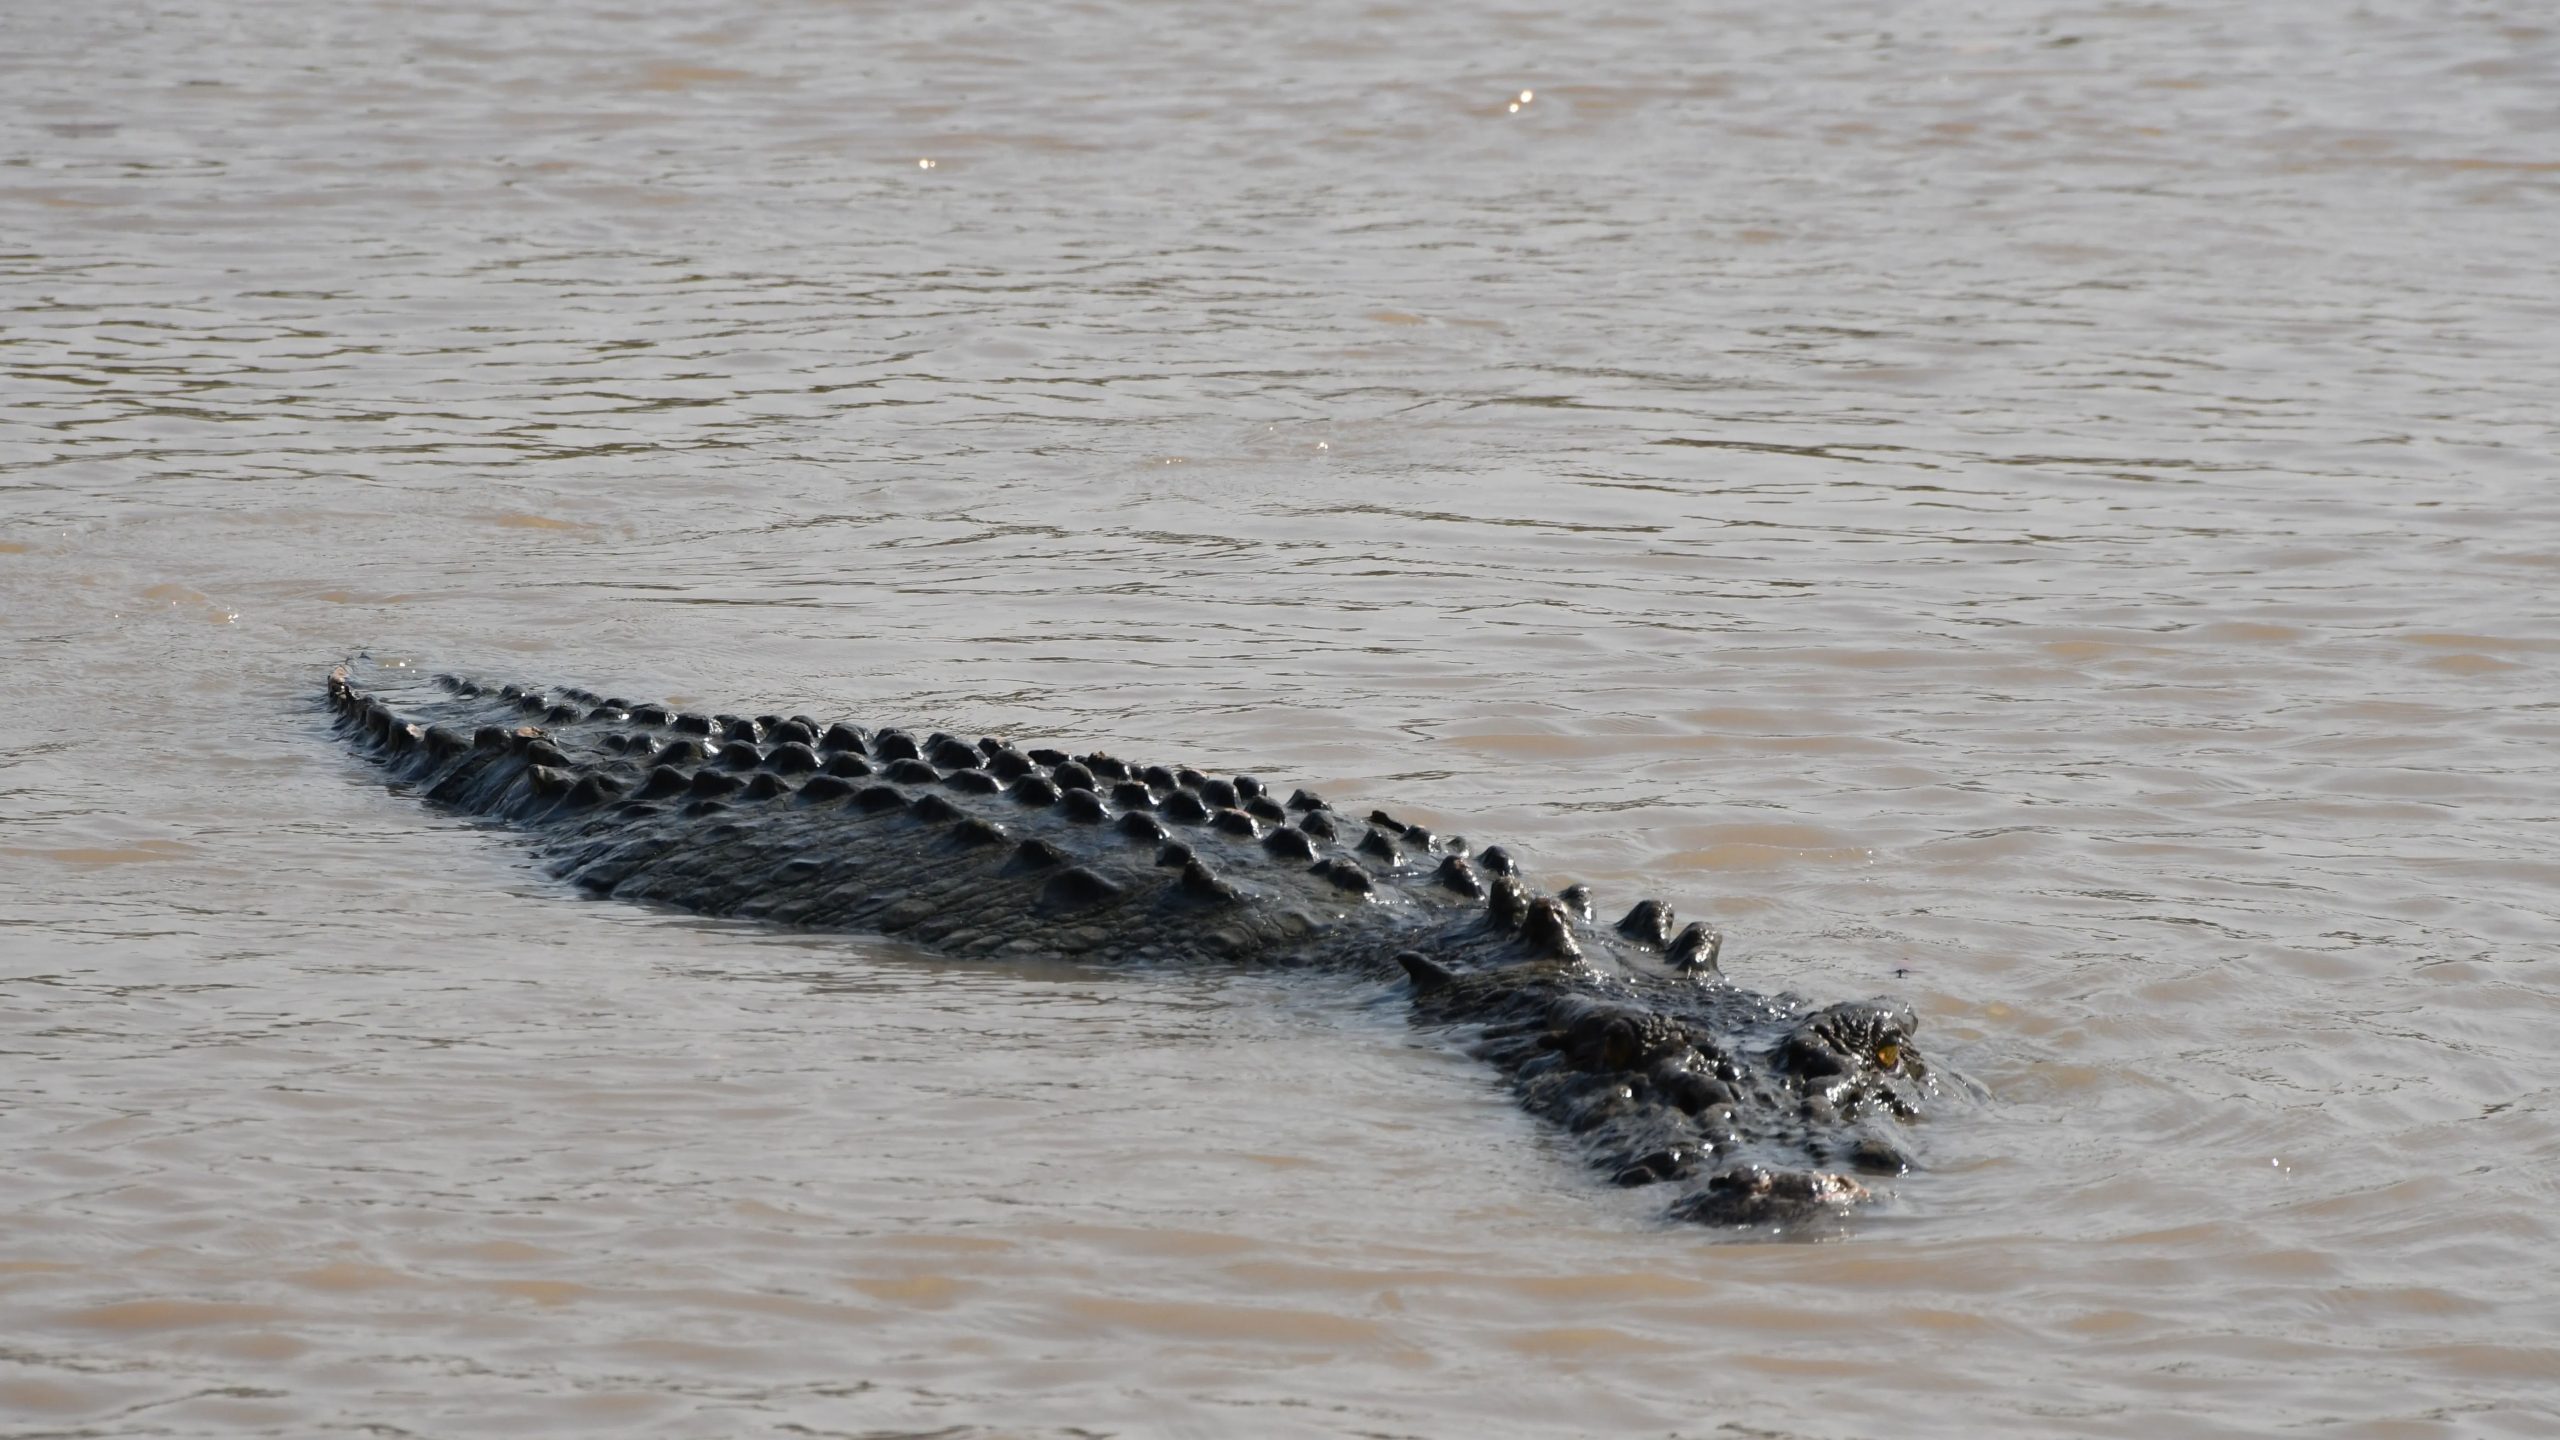 Woman fights off crocodile to save twin in Mexico lagoon